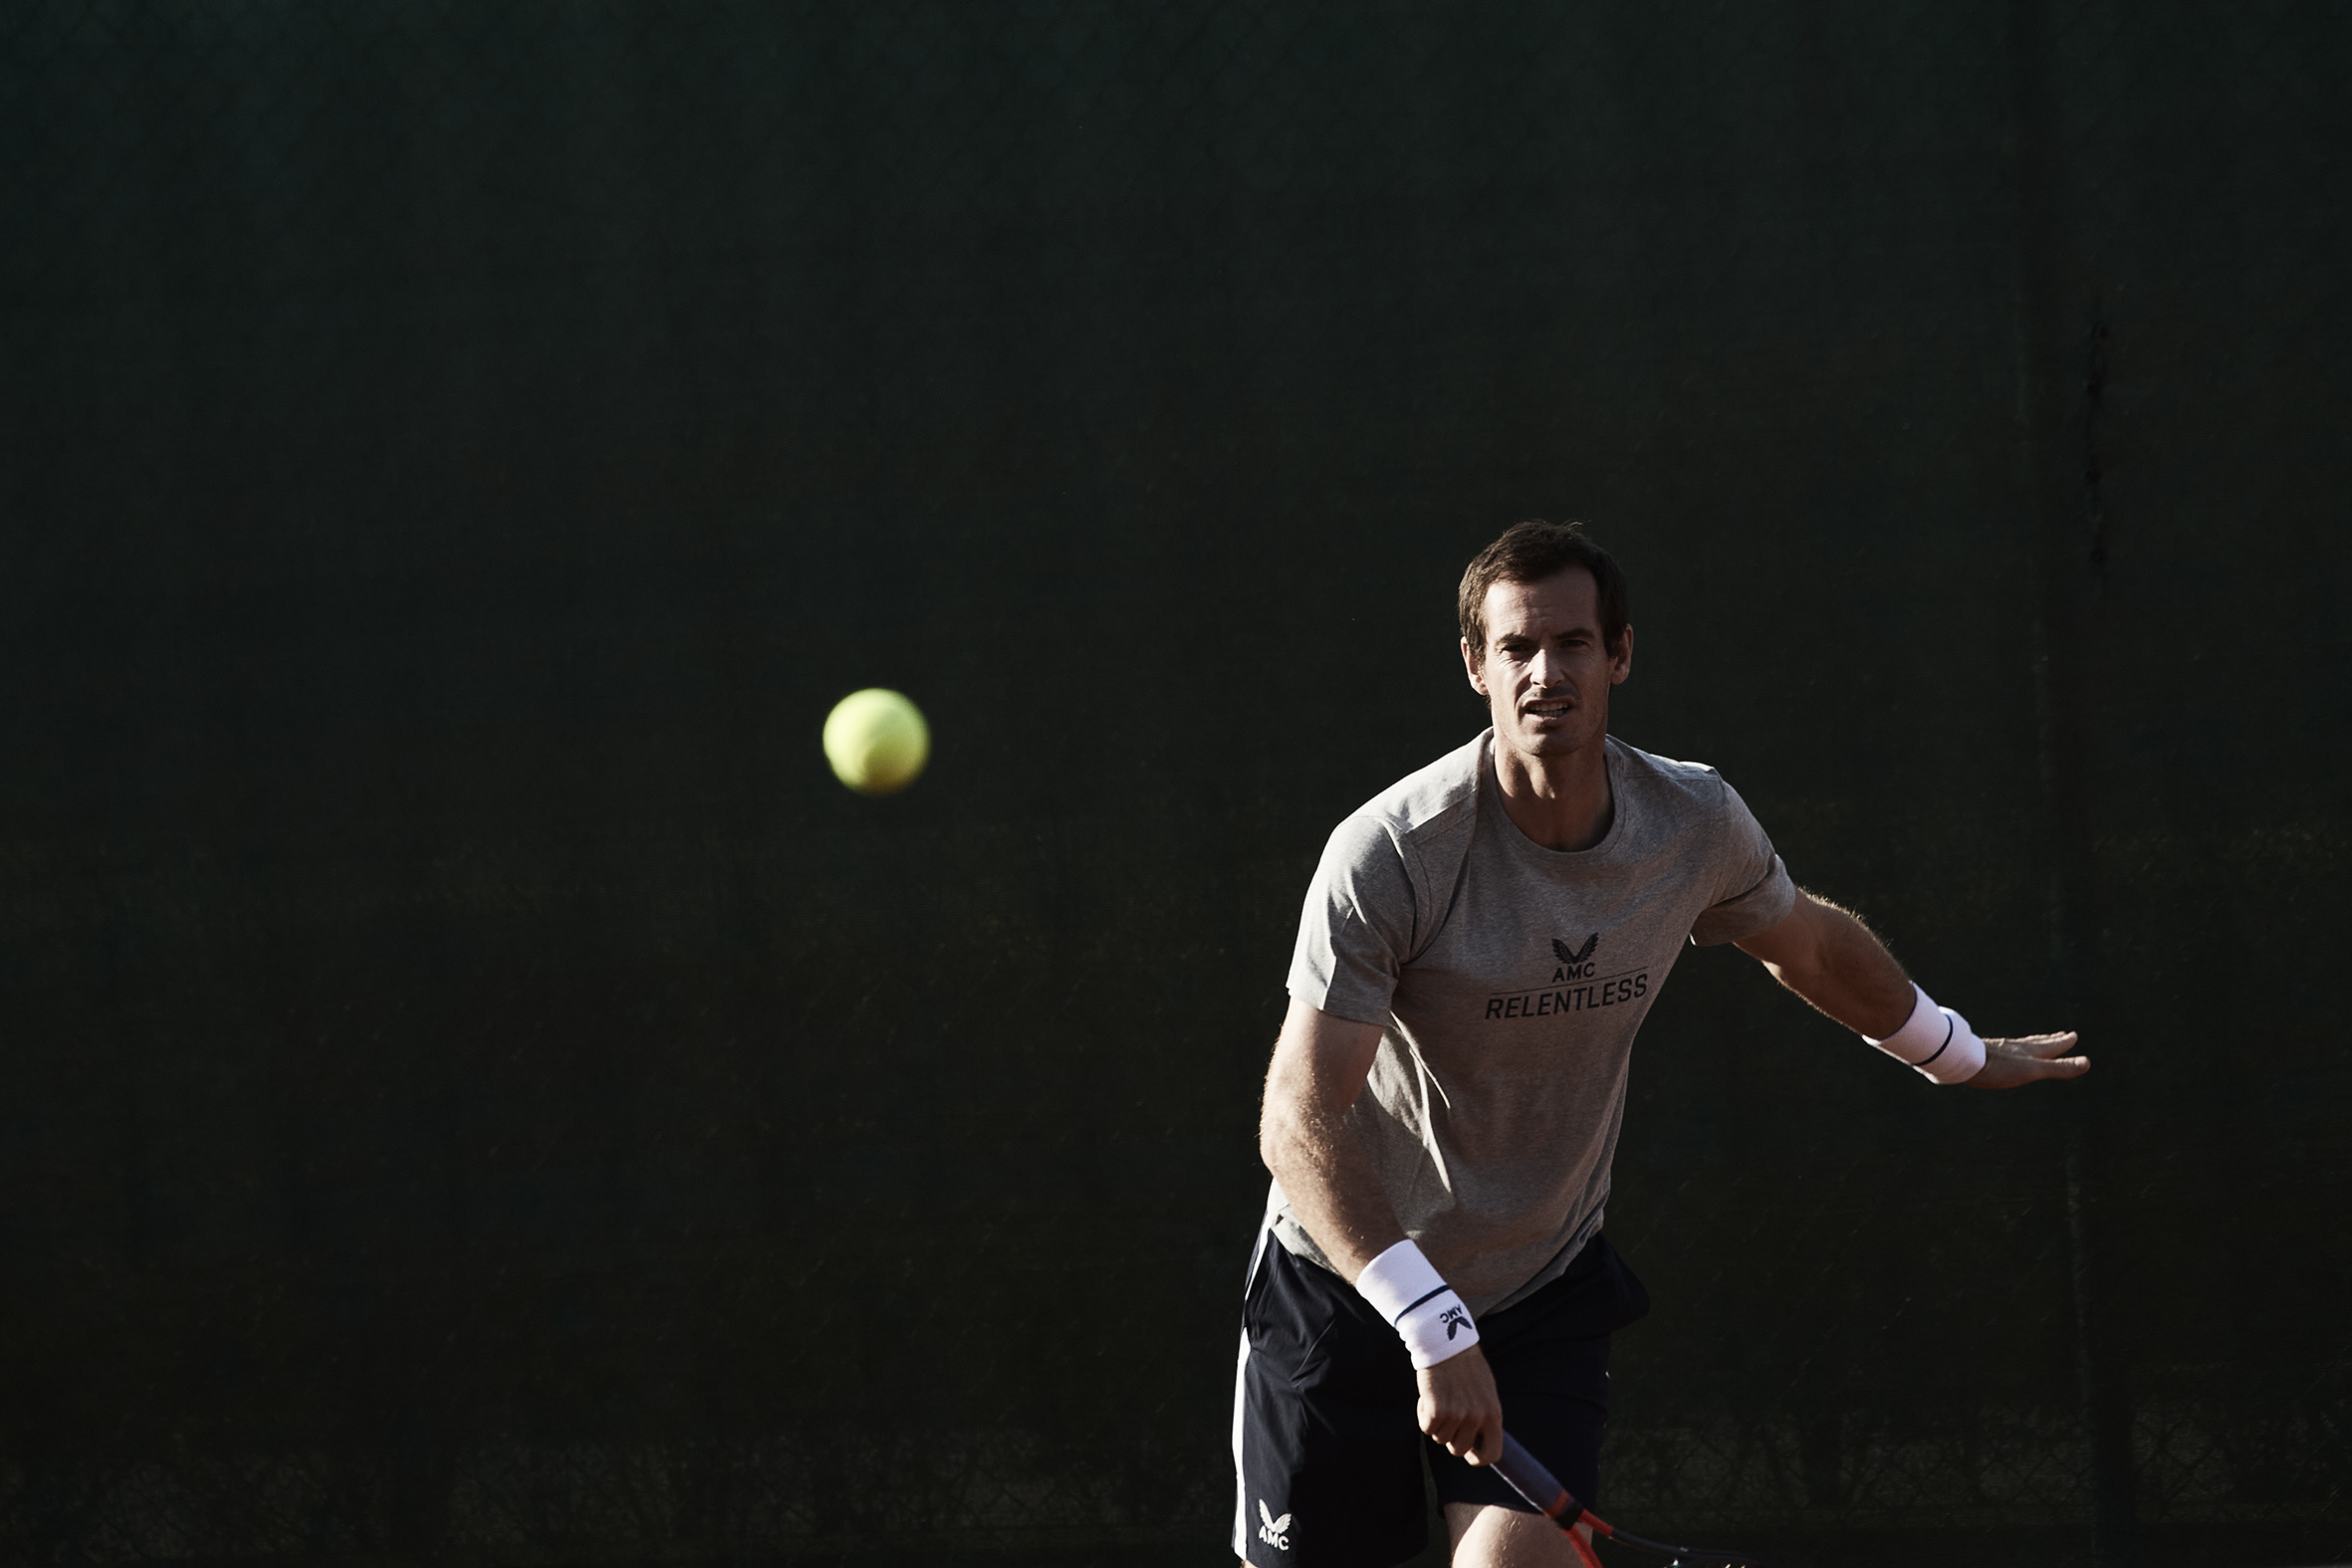 Andy Murray, wearing his AMC clothing brand, has thrown himself into gym work